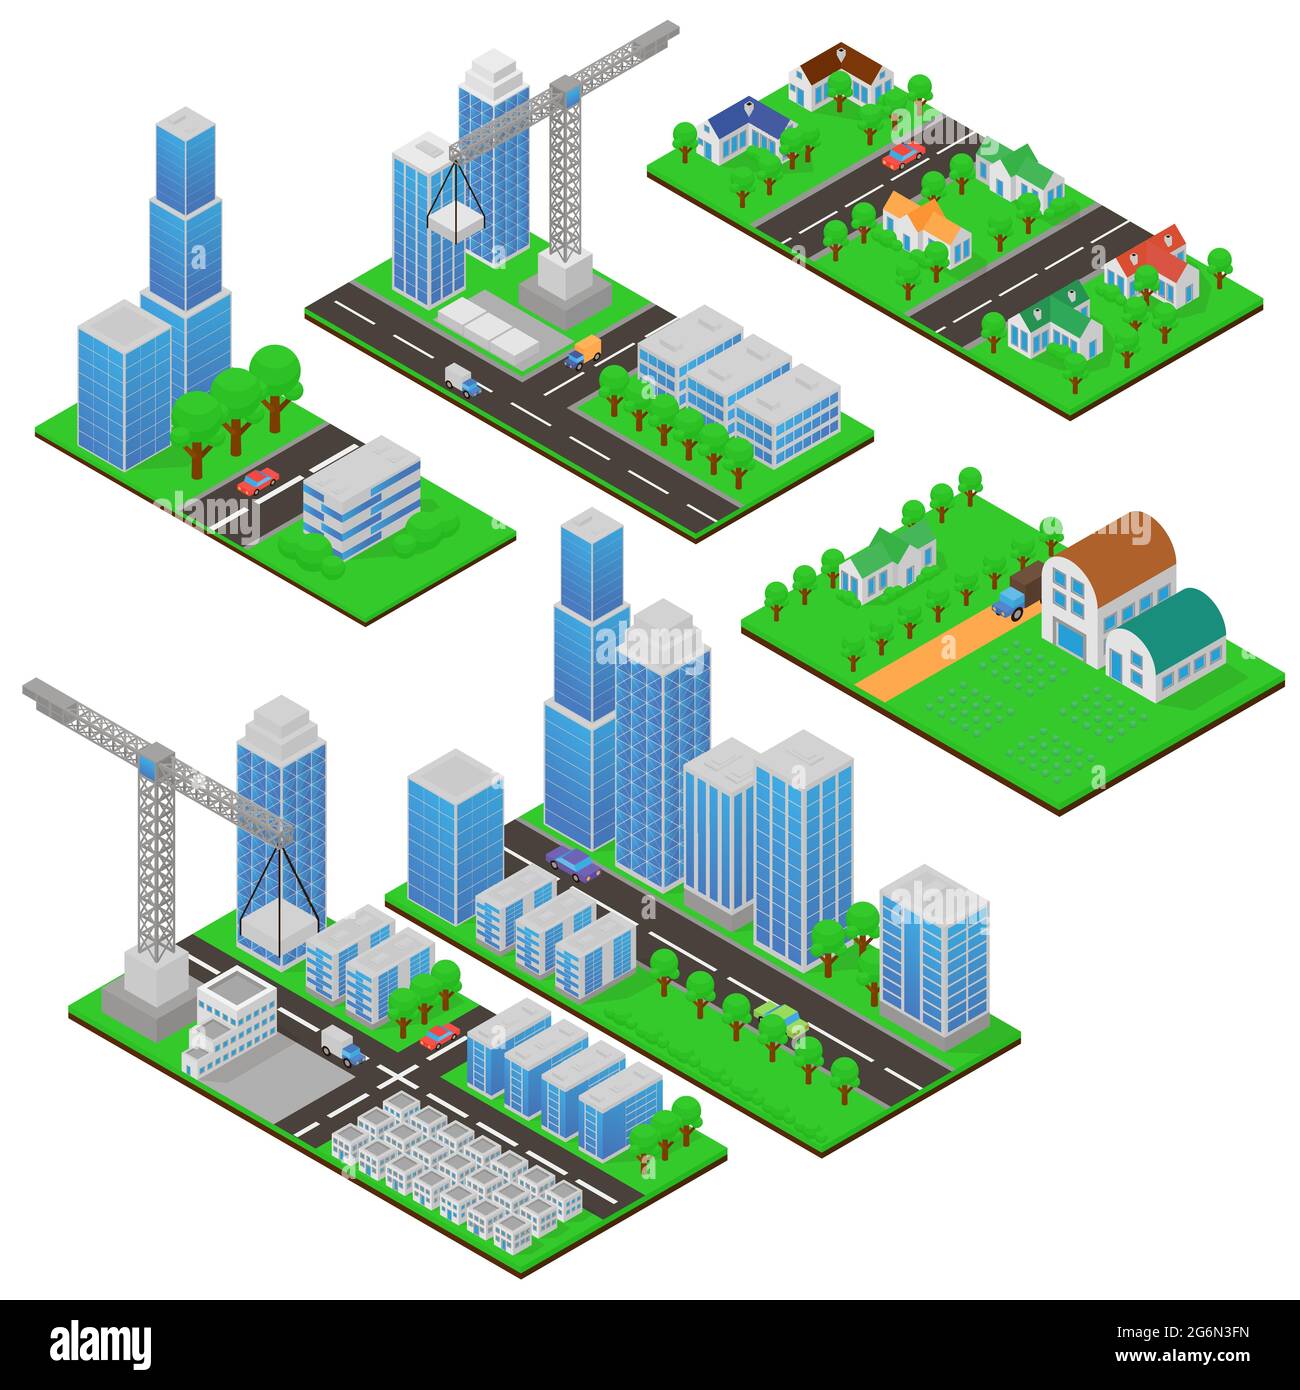 Isometric buildings and building constructions with trees and roads. Public buildings, country houses, living complexes and skyscrapers in 3d in Stock Vector